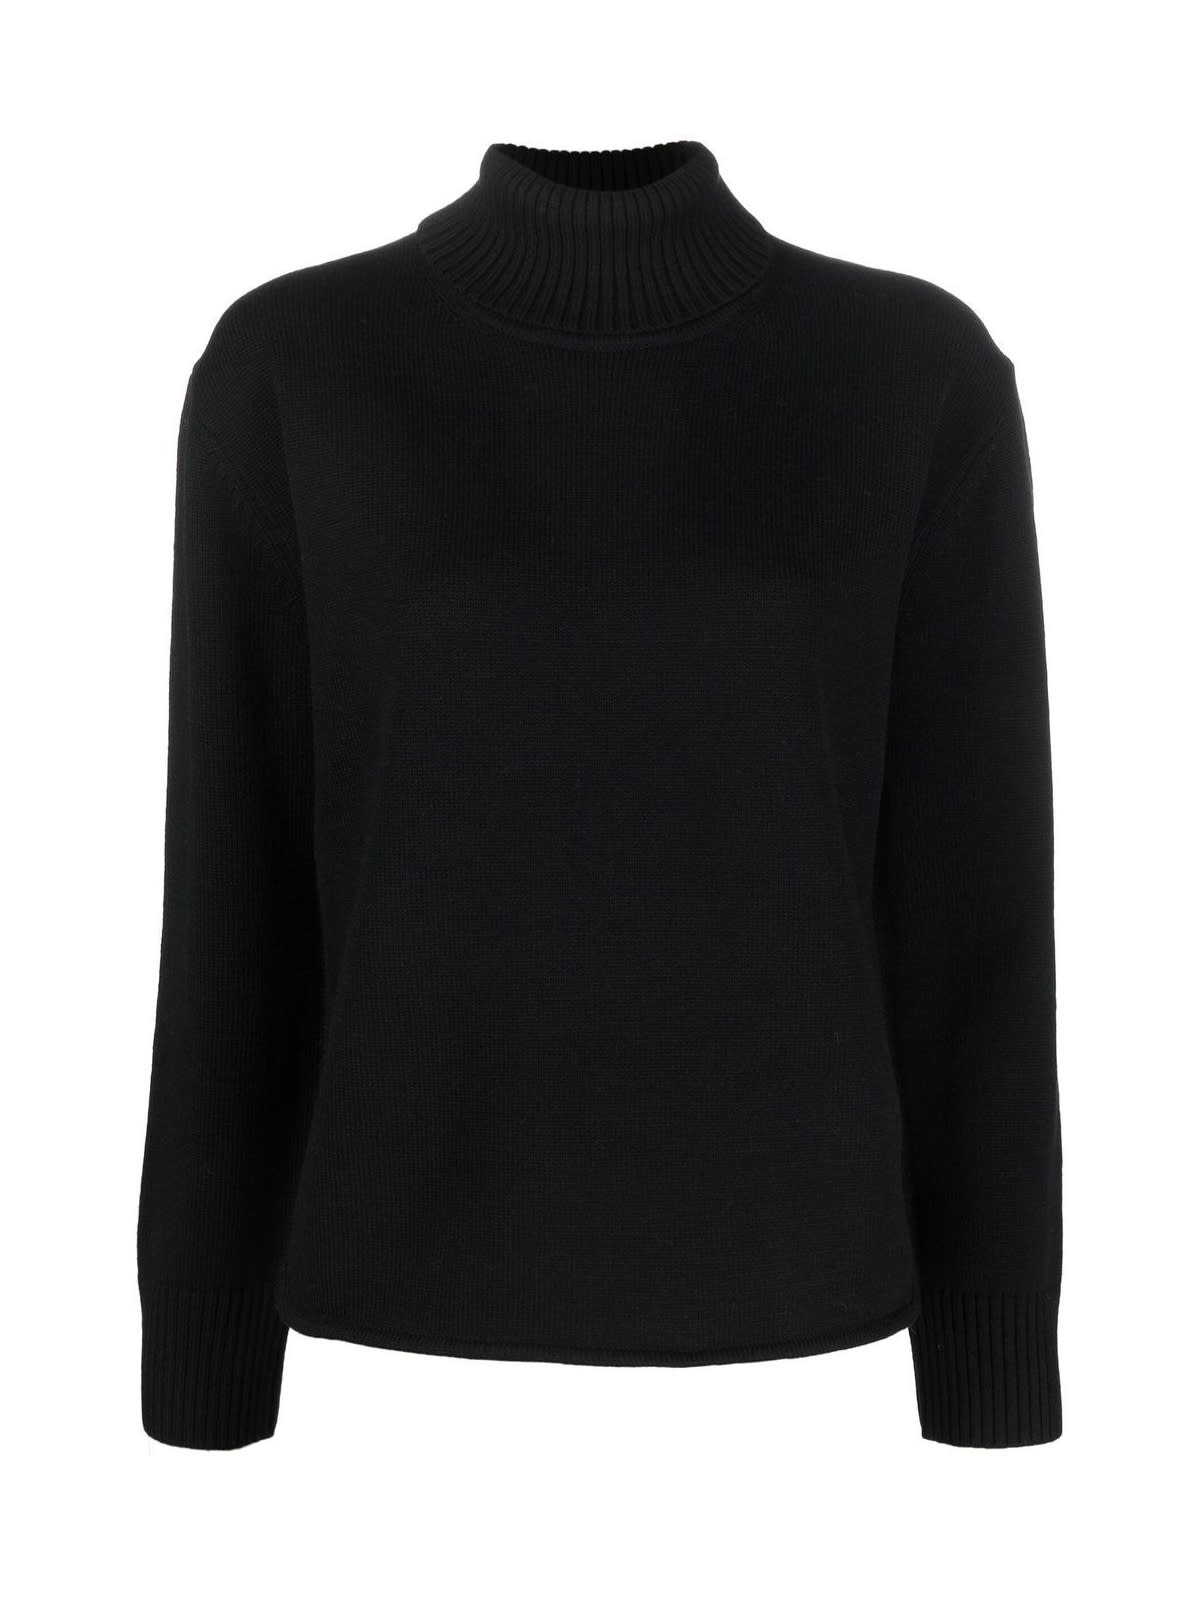 PS by Paul Smith Womens Knitted Roll Neck Pullover